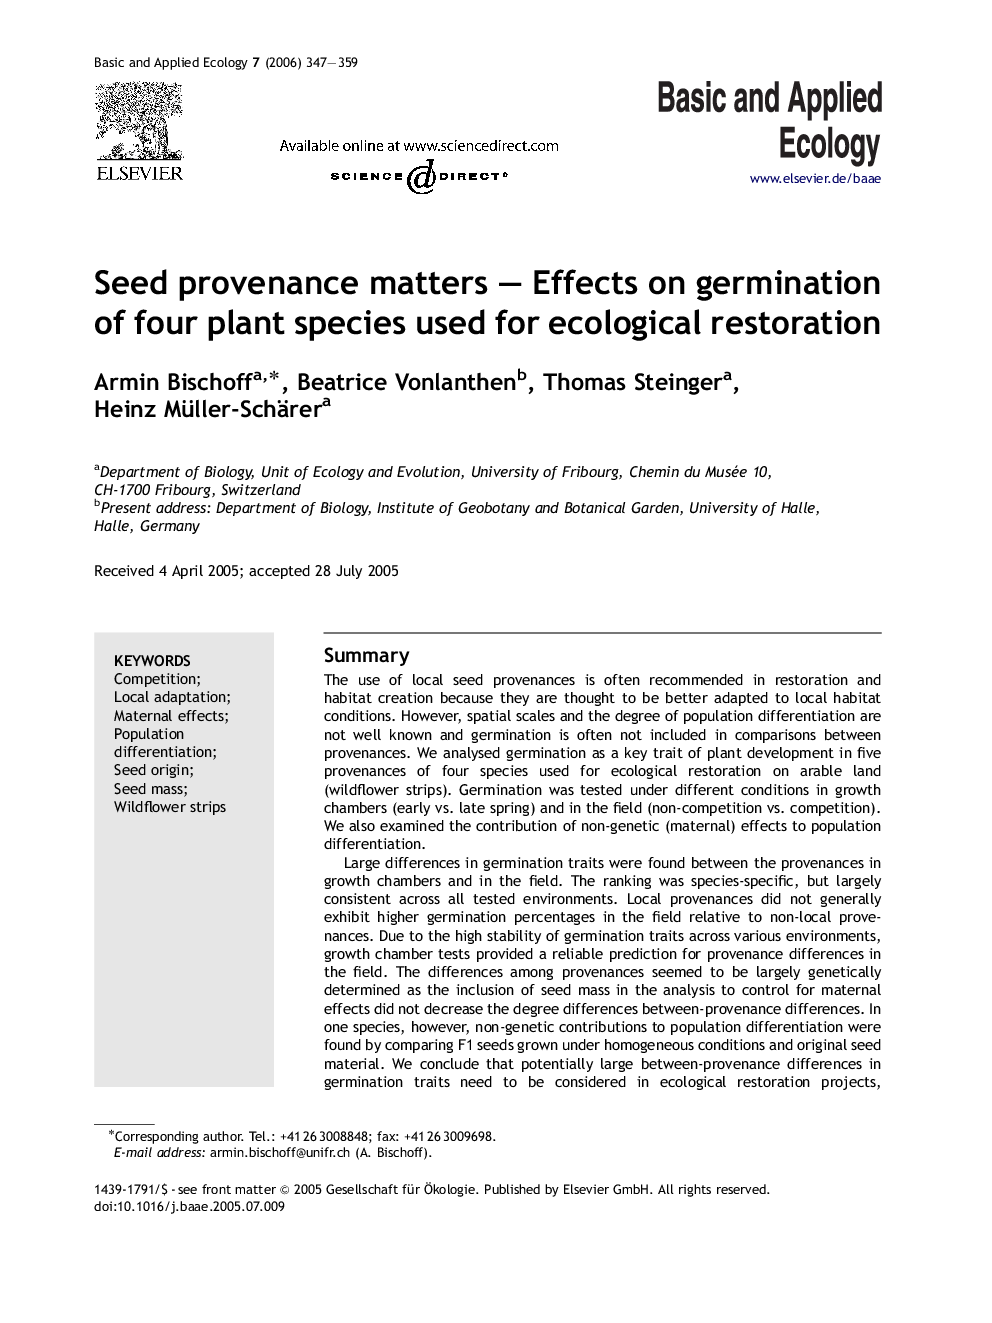 Seed provenance matters — Effects on germination of four plant species used for ecological restoration